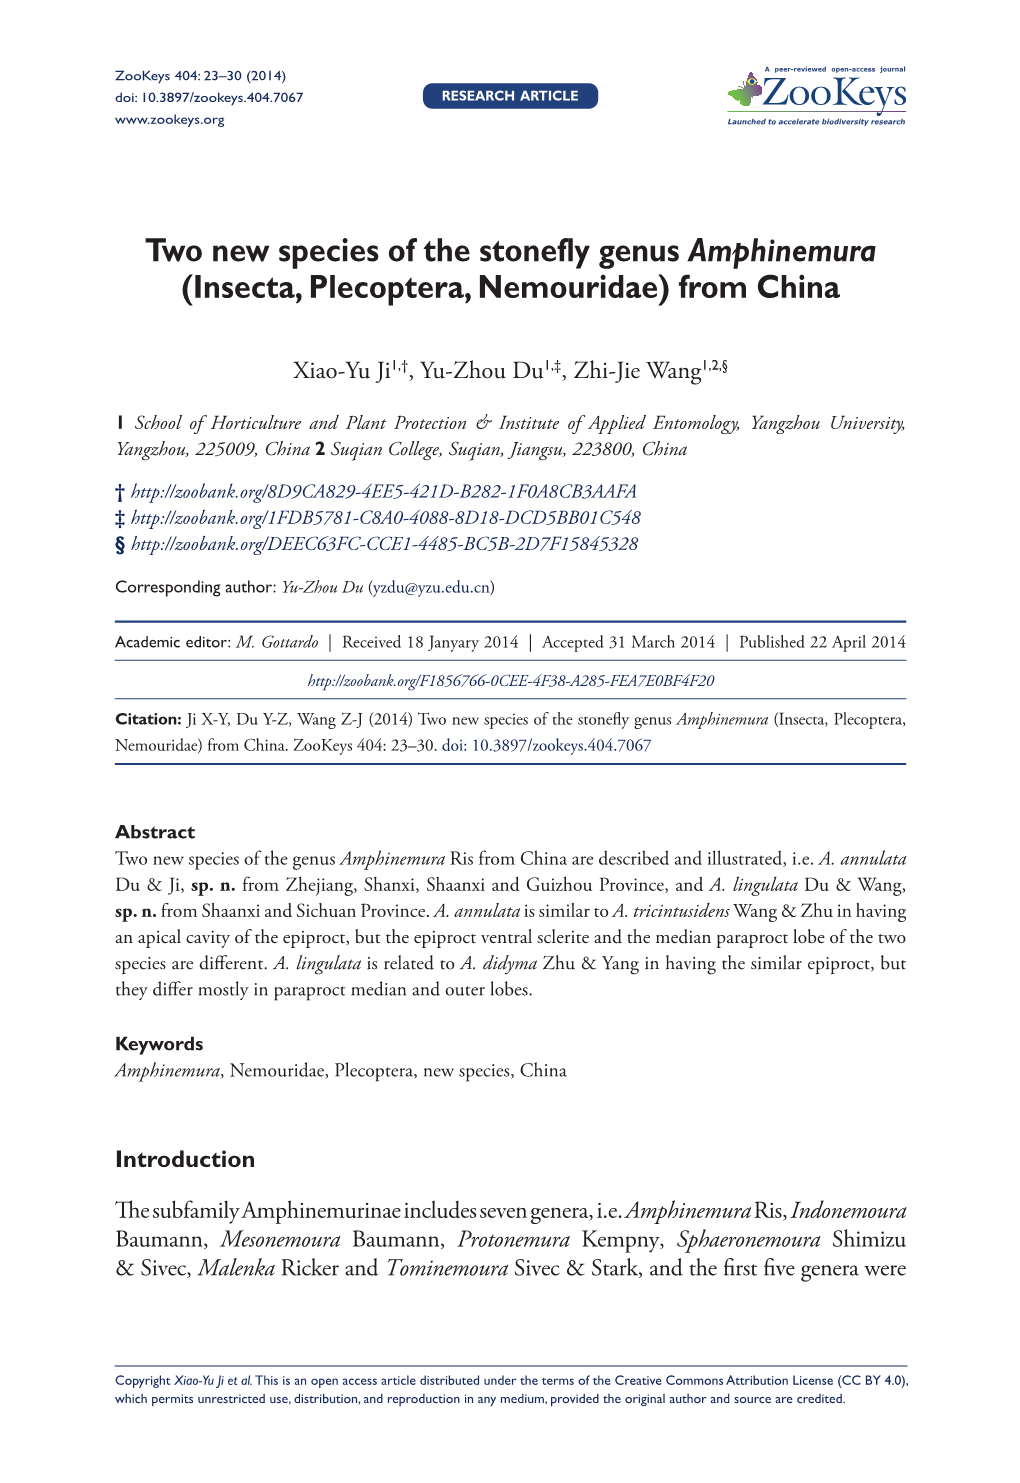 Two New Species of the Stonefly Genus Amphinemura (Insecta, Plecoptera, Nemouridae) from China